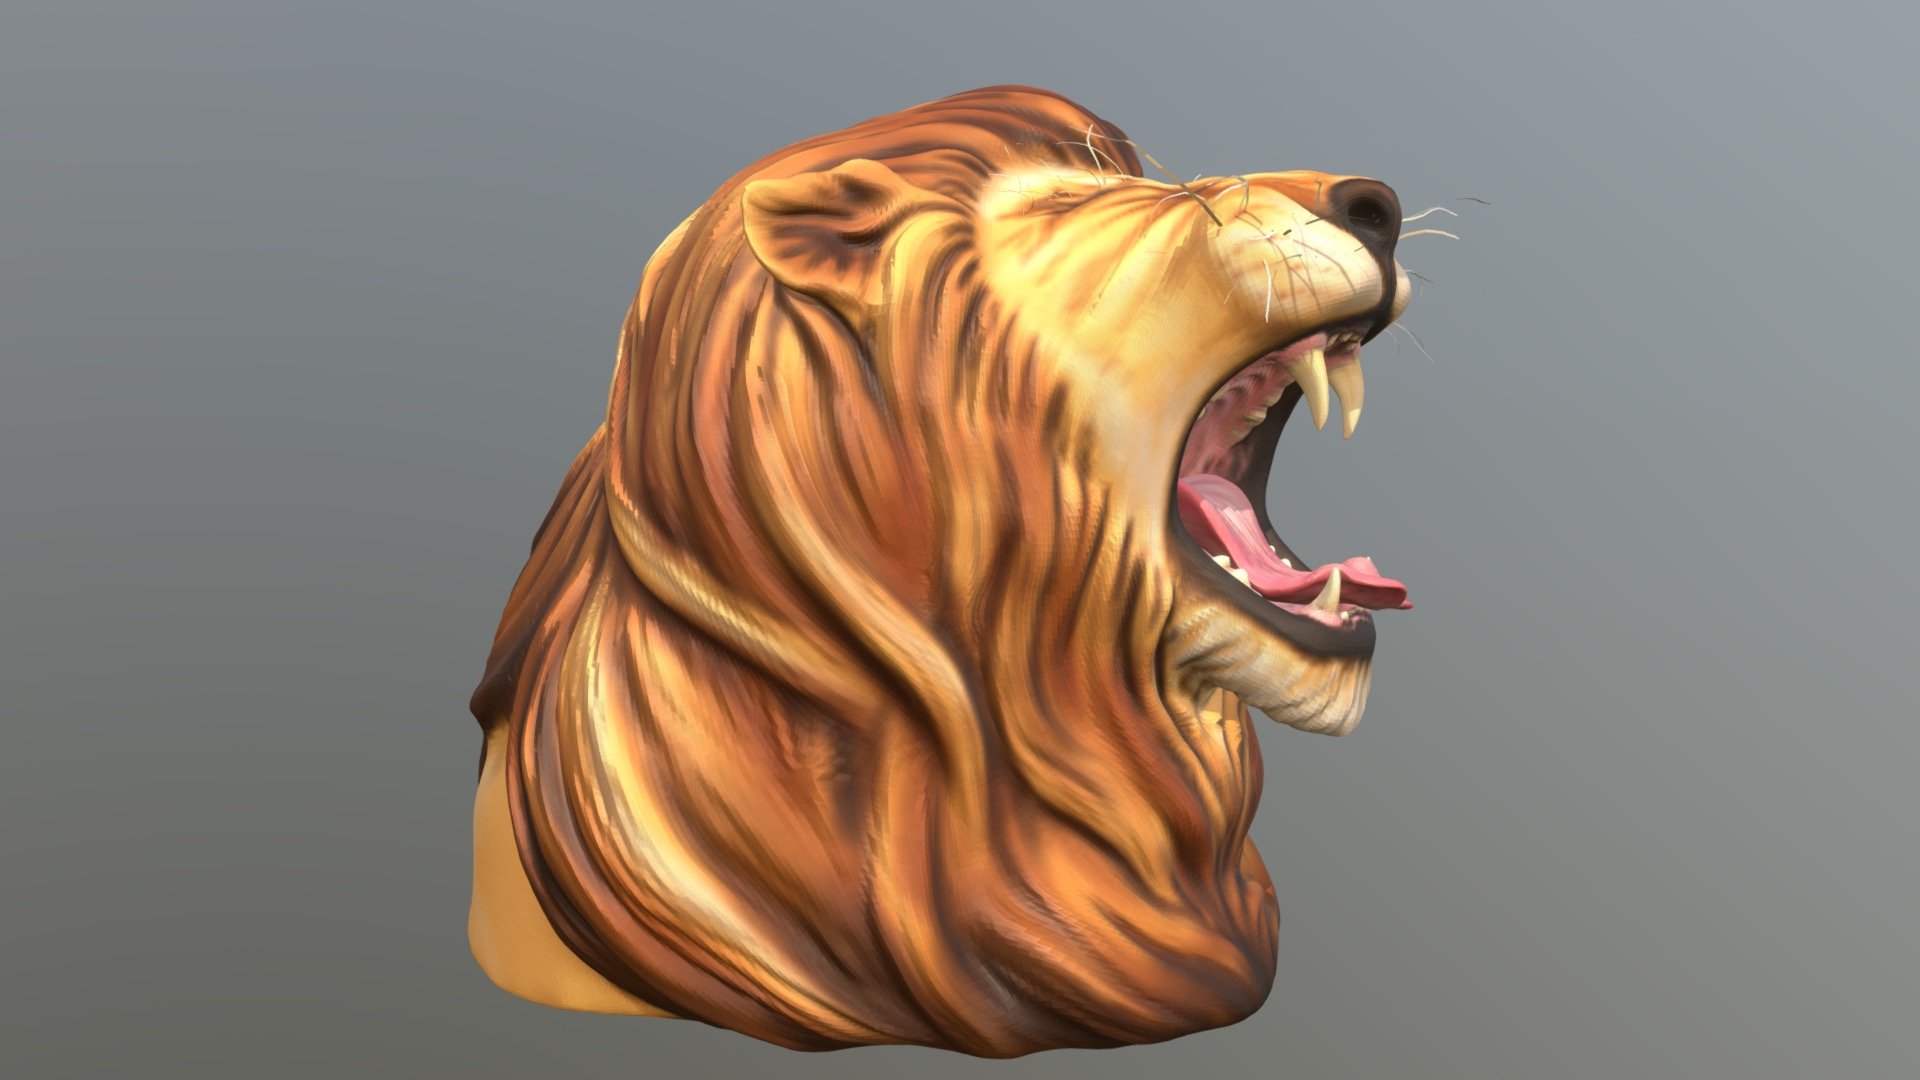 Lion bust project for my 3D Modeling class

Made in ZBrush - Lion Bust - 3D model by jekoia 3d model